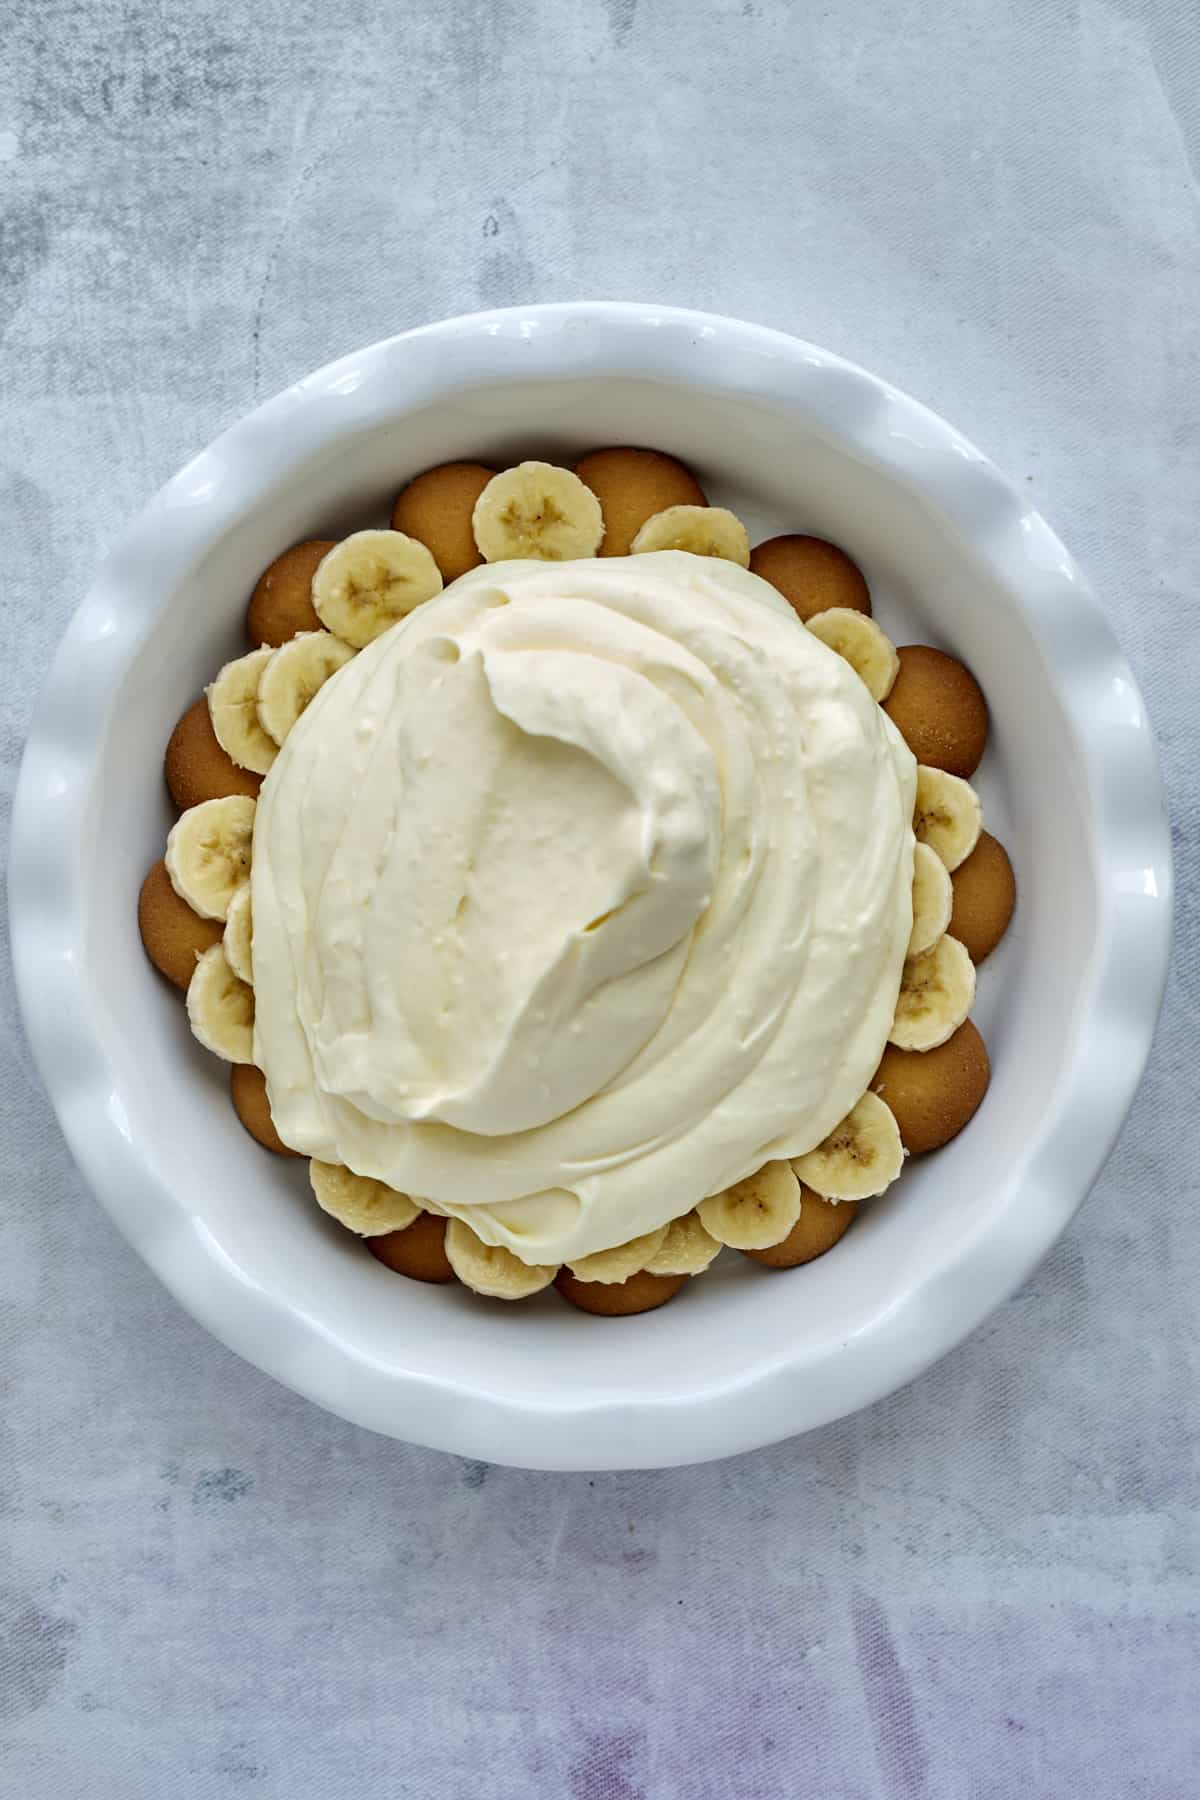 Nilla wafers topped with banana slices and vanilla pudding filling in a baking dish